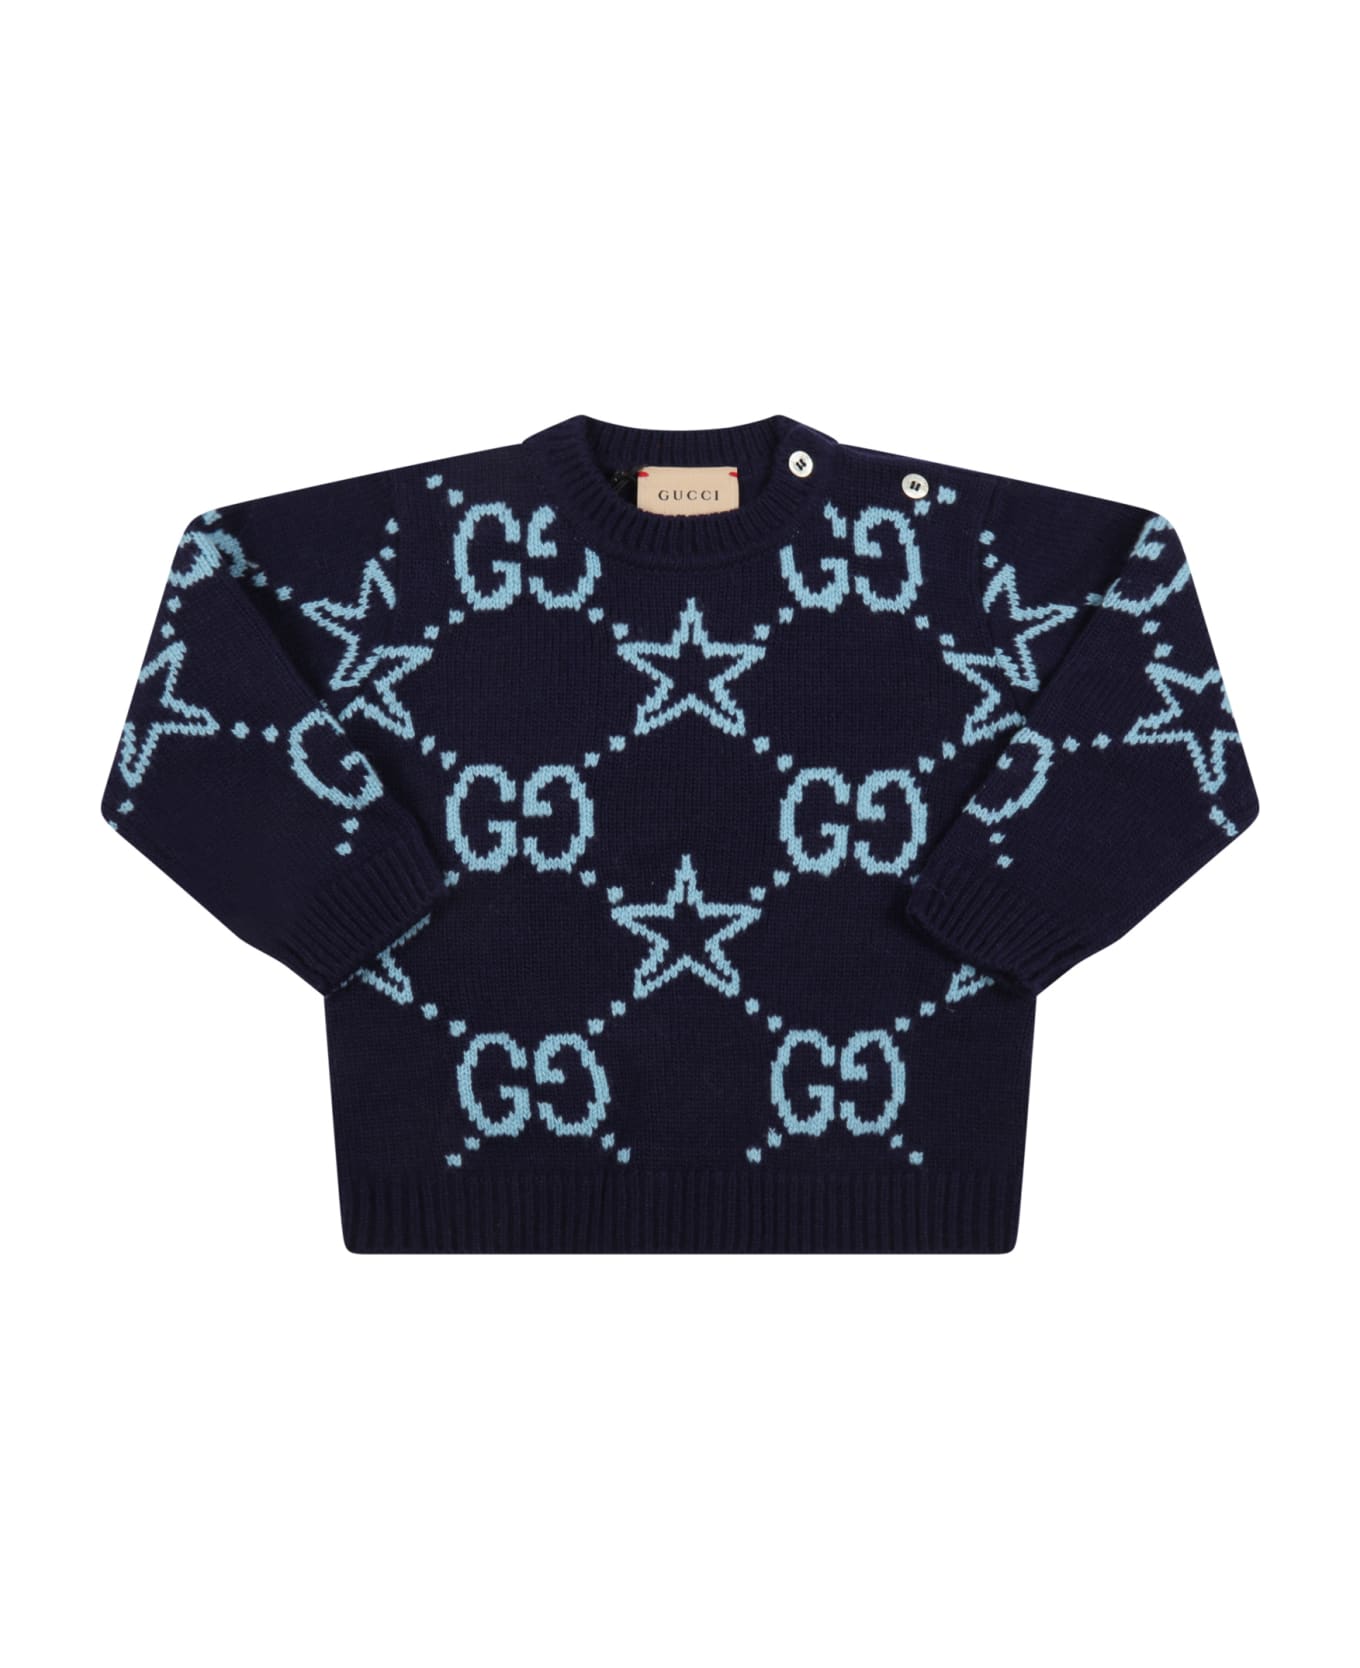 Gucci Blue Sweater For Baby Boy With Stars - Blue